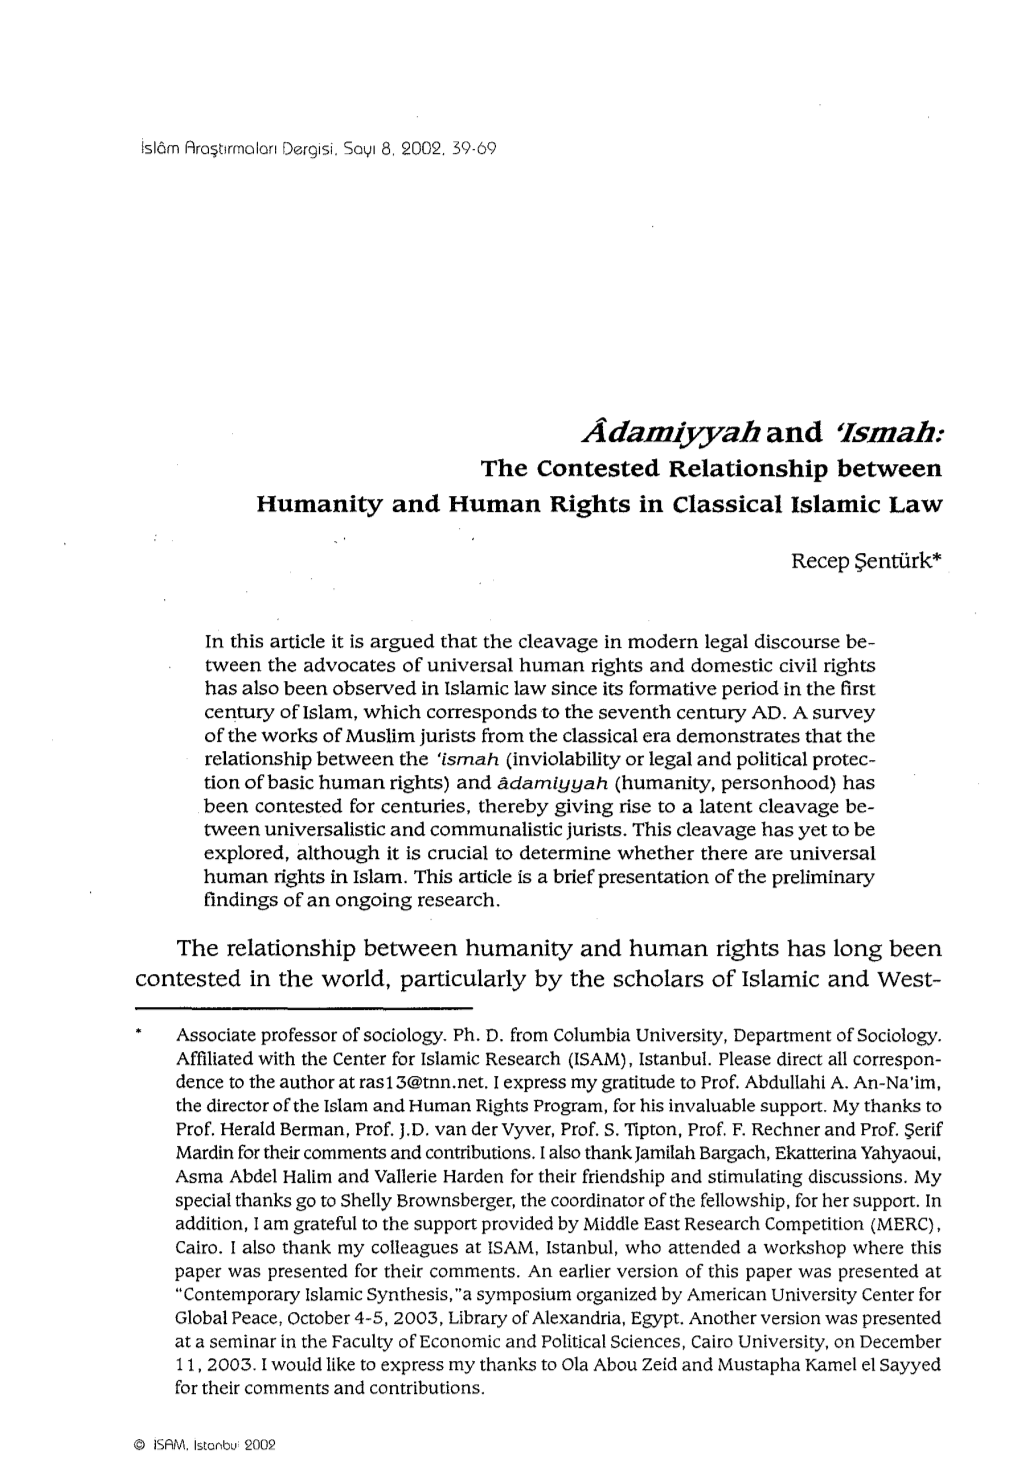 The Contested Relationship Between Humanity and Human Rights in Classical Islamic Law